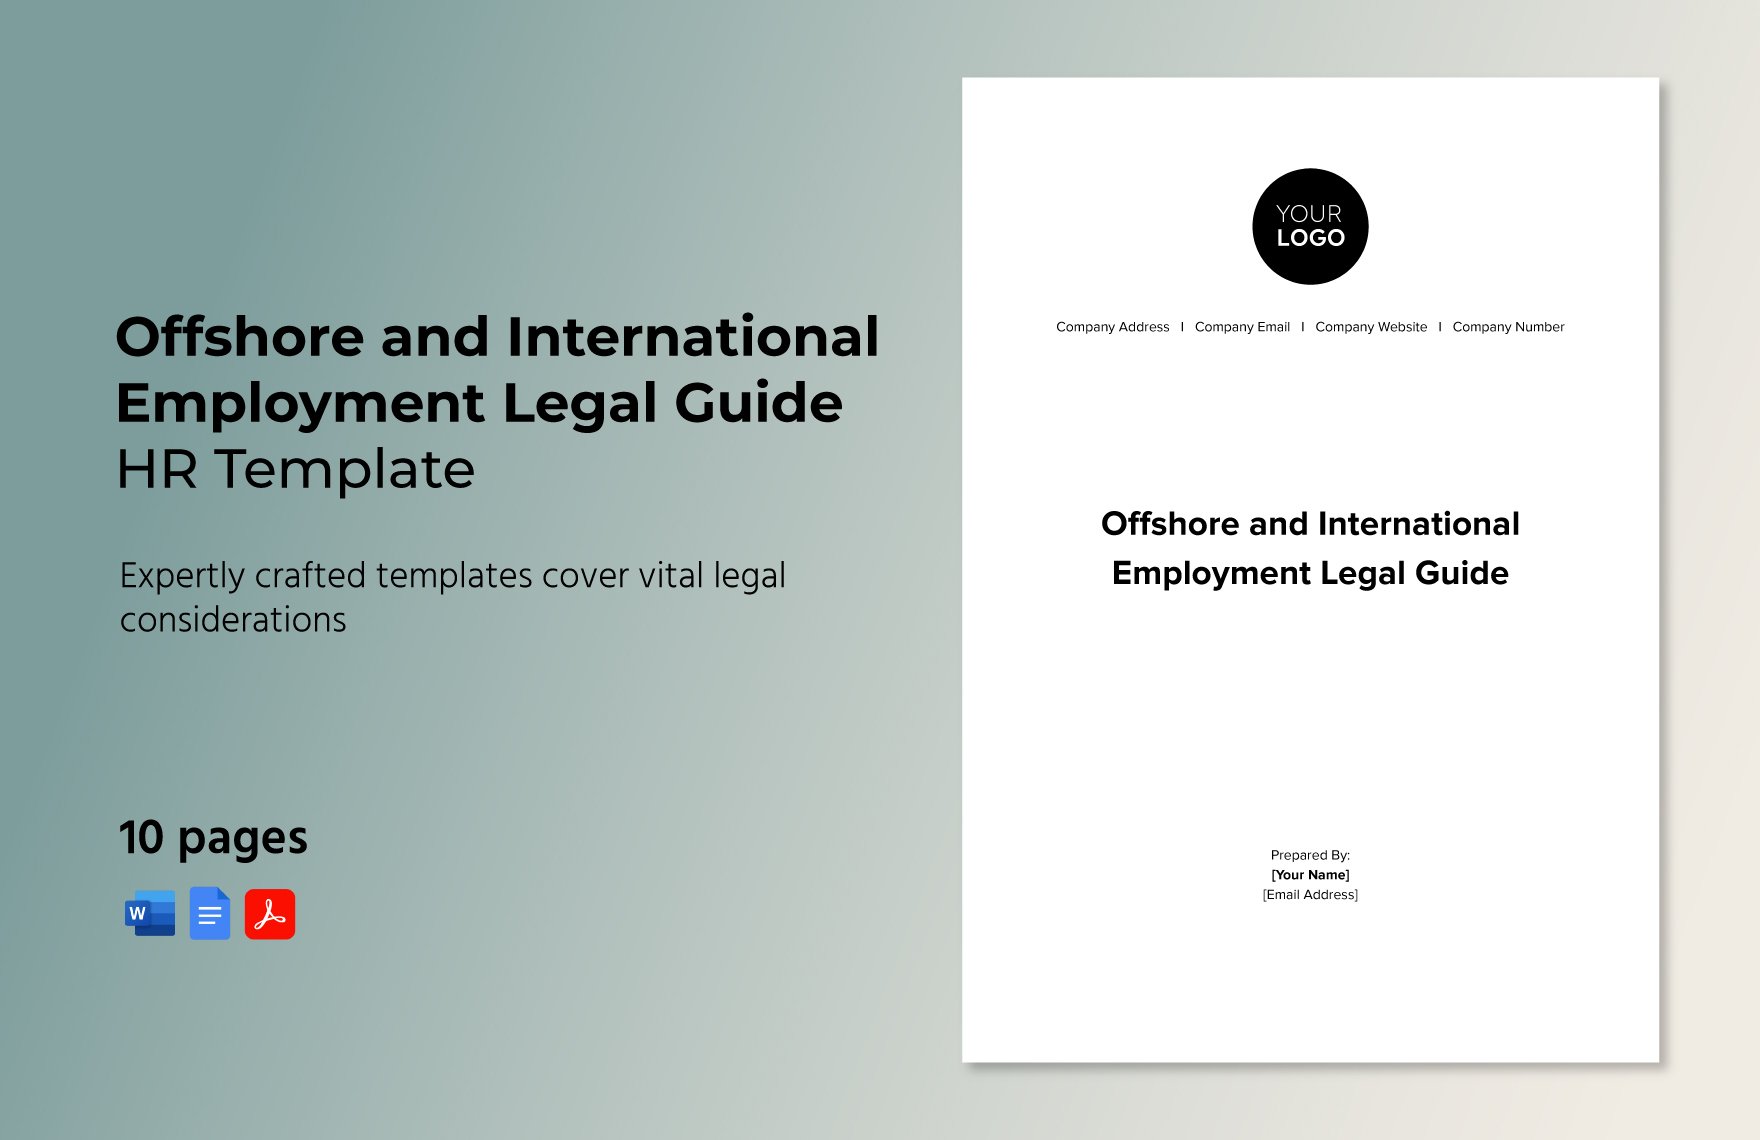 Offshore and International Employment Legal Guide HR Template in Word, Google Docs, PDF